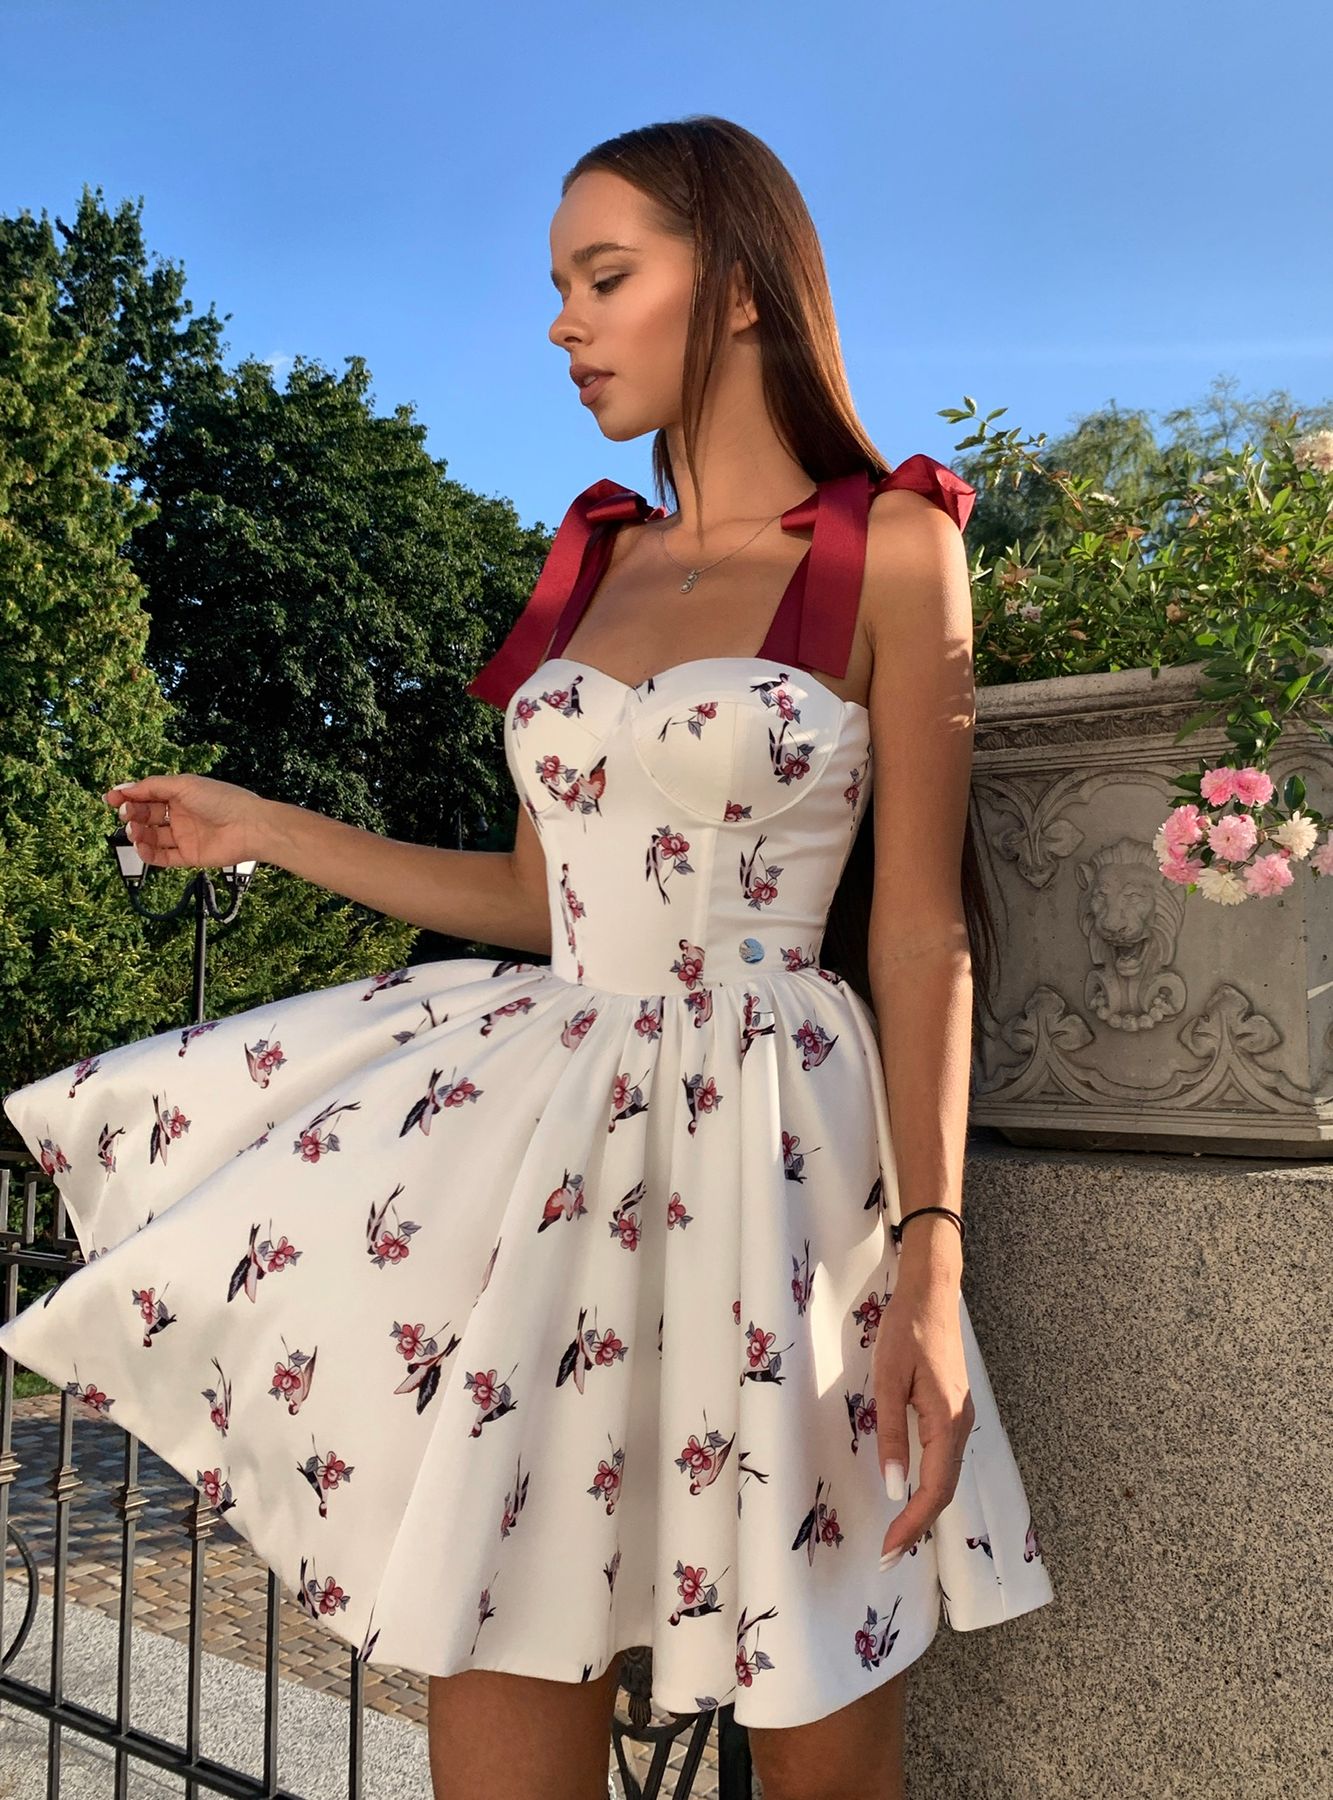 https://misscandy.ua/content/images/10/1333x1800l80mc0/ivory-silky-satin-dress-with-push-up-cups-and-burgundy-ribbons-85496460913244.jpeg